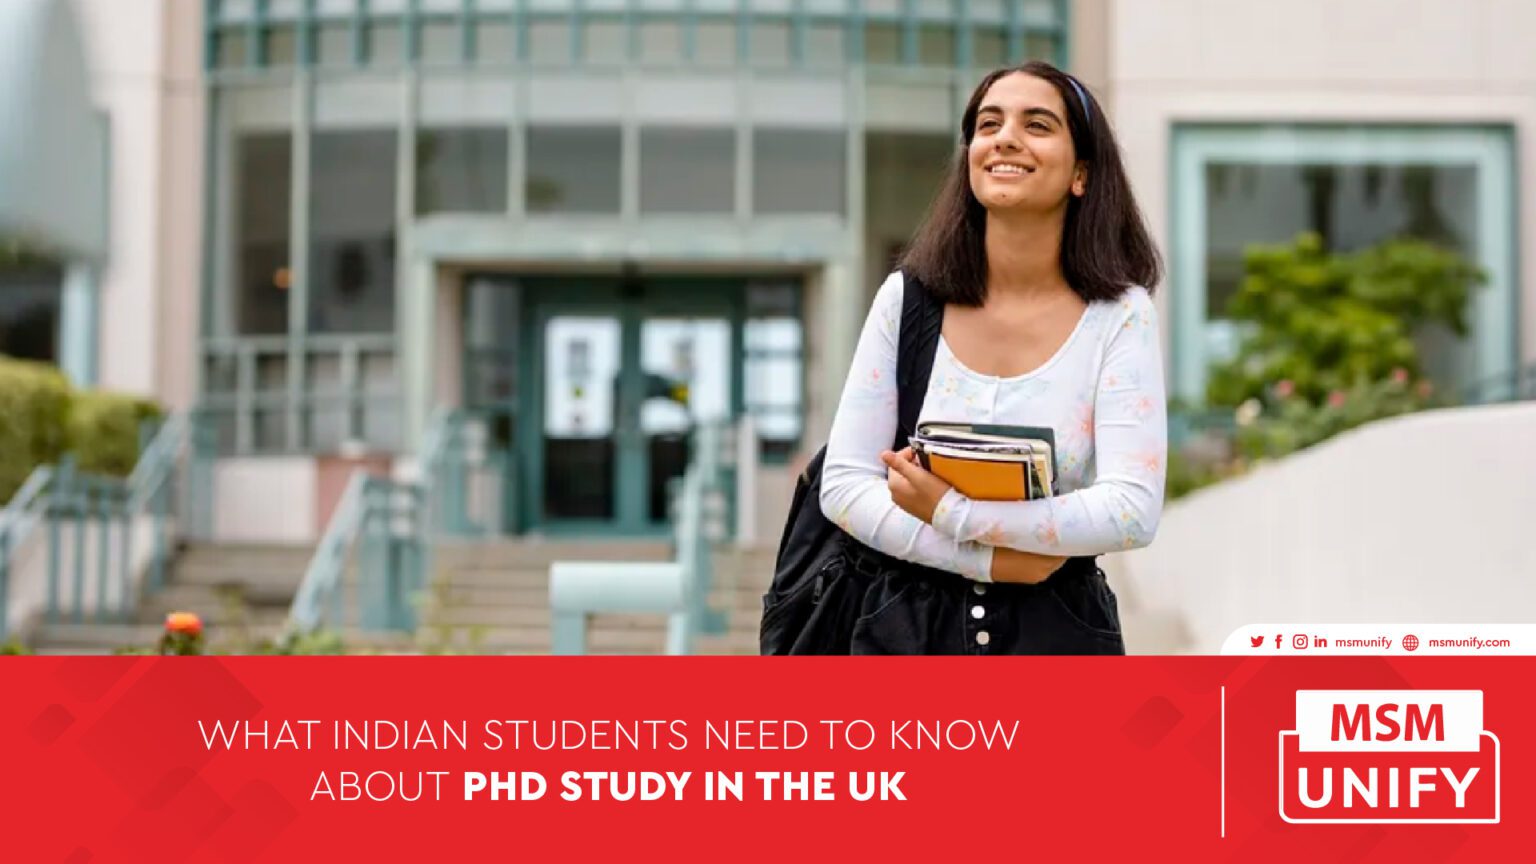 013023 MSM Unify What Indian Students Need to Know About PhD Study in the UK 01